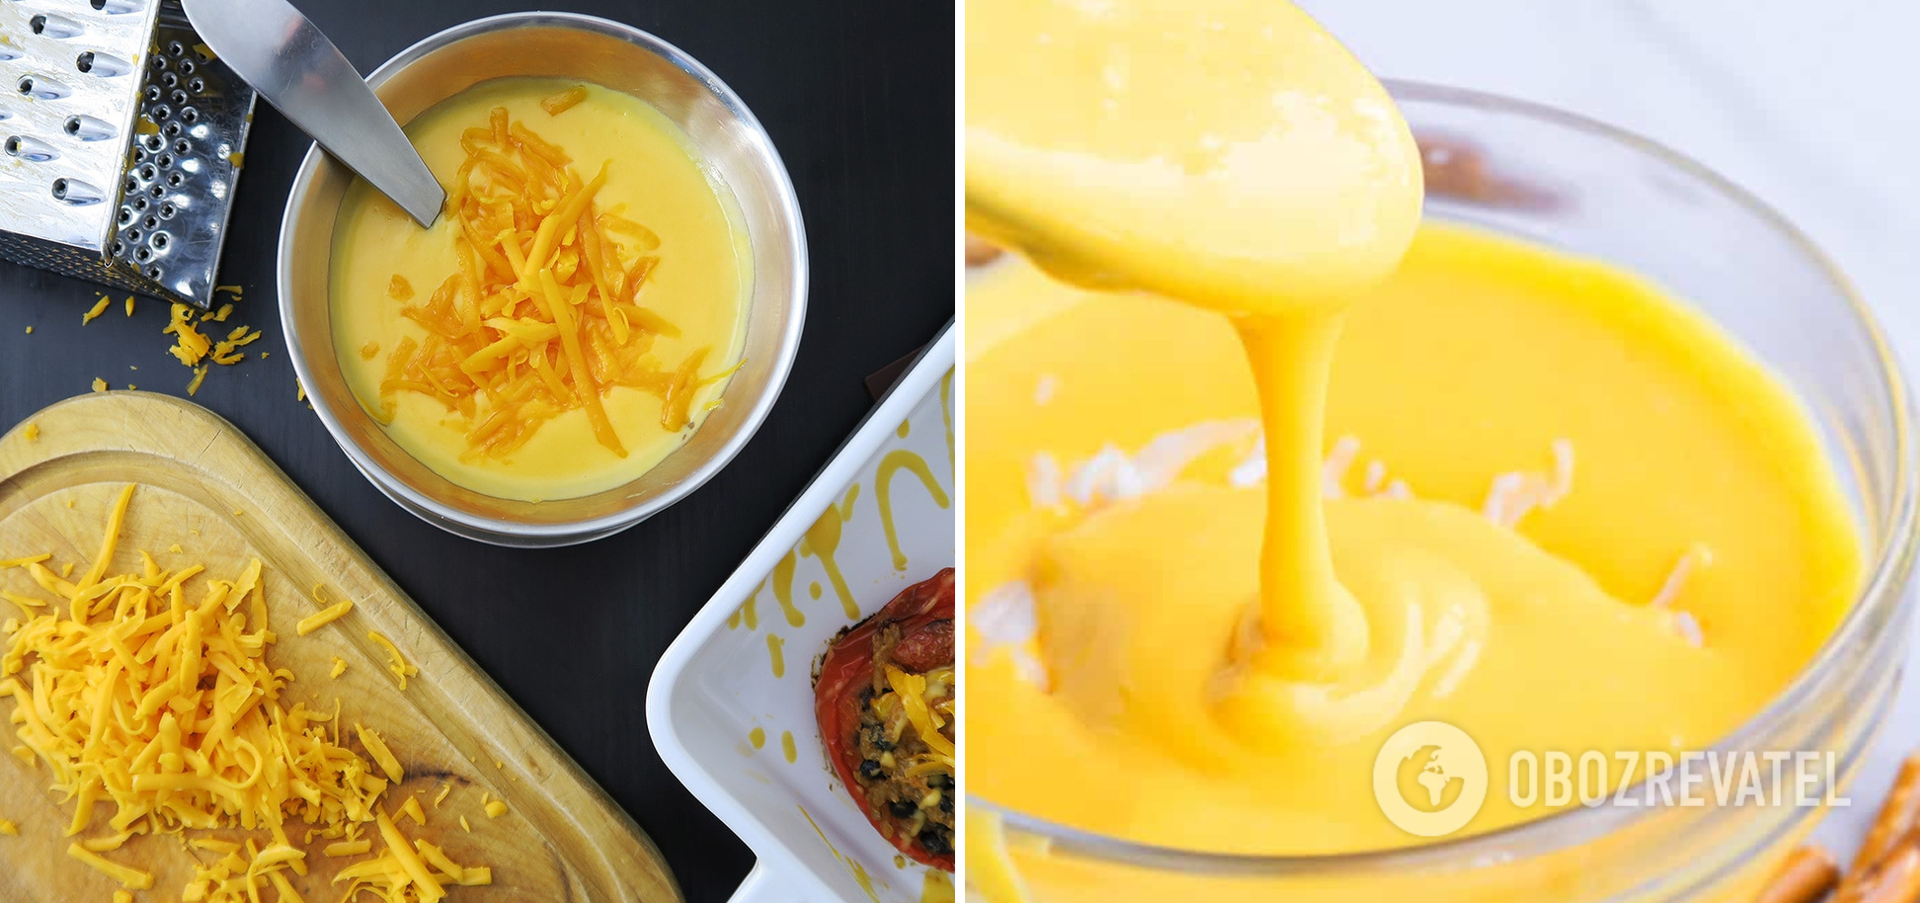 How to cook cheese sauce properly